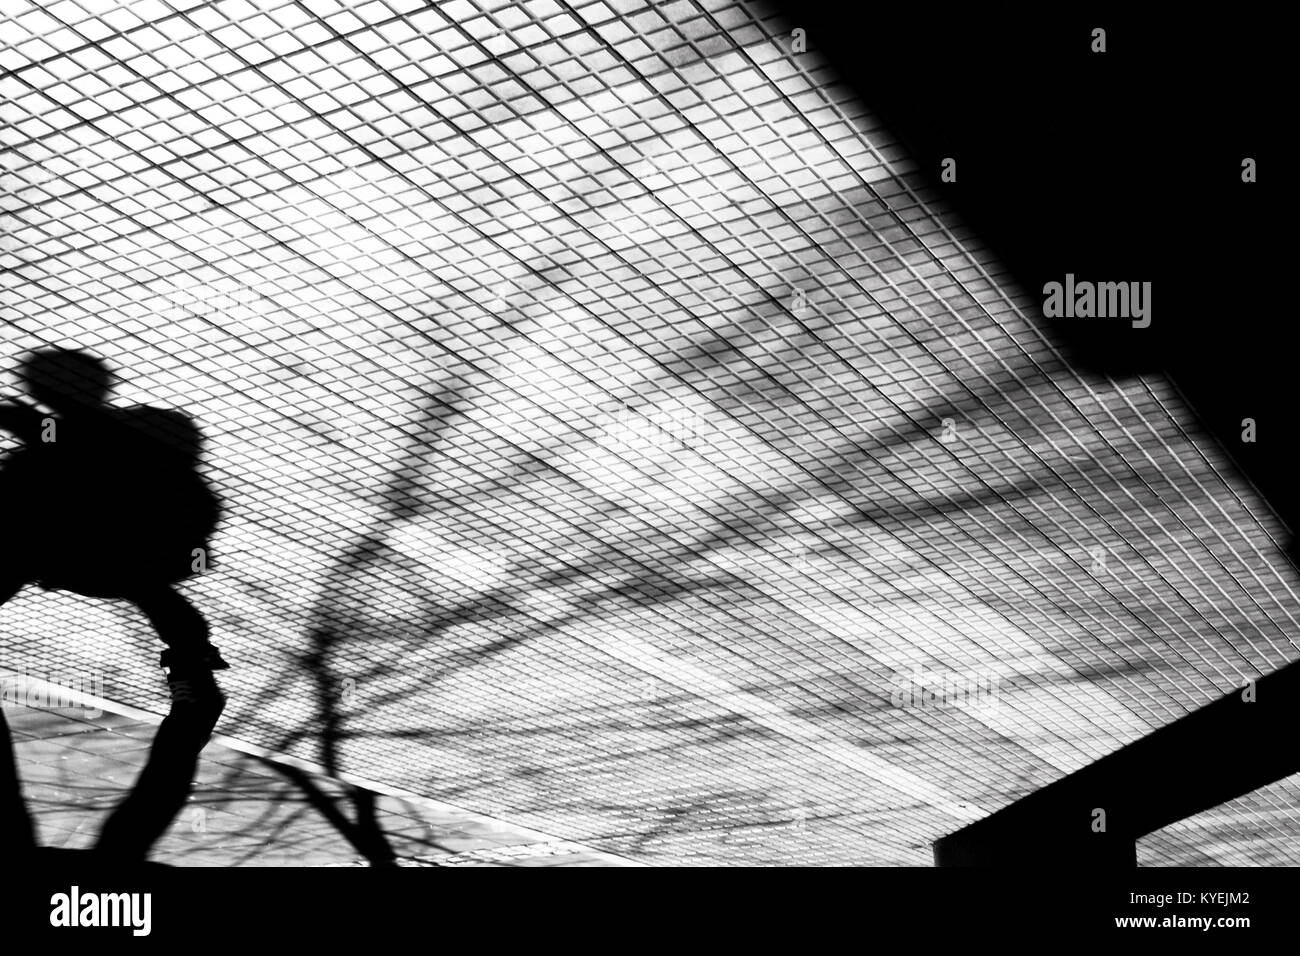 Blurry silhouette shadow of a person walking on a city sidewalk in winter in black and white high contrast Stock Photo